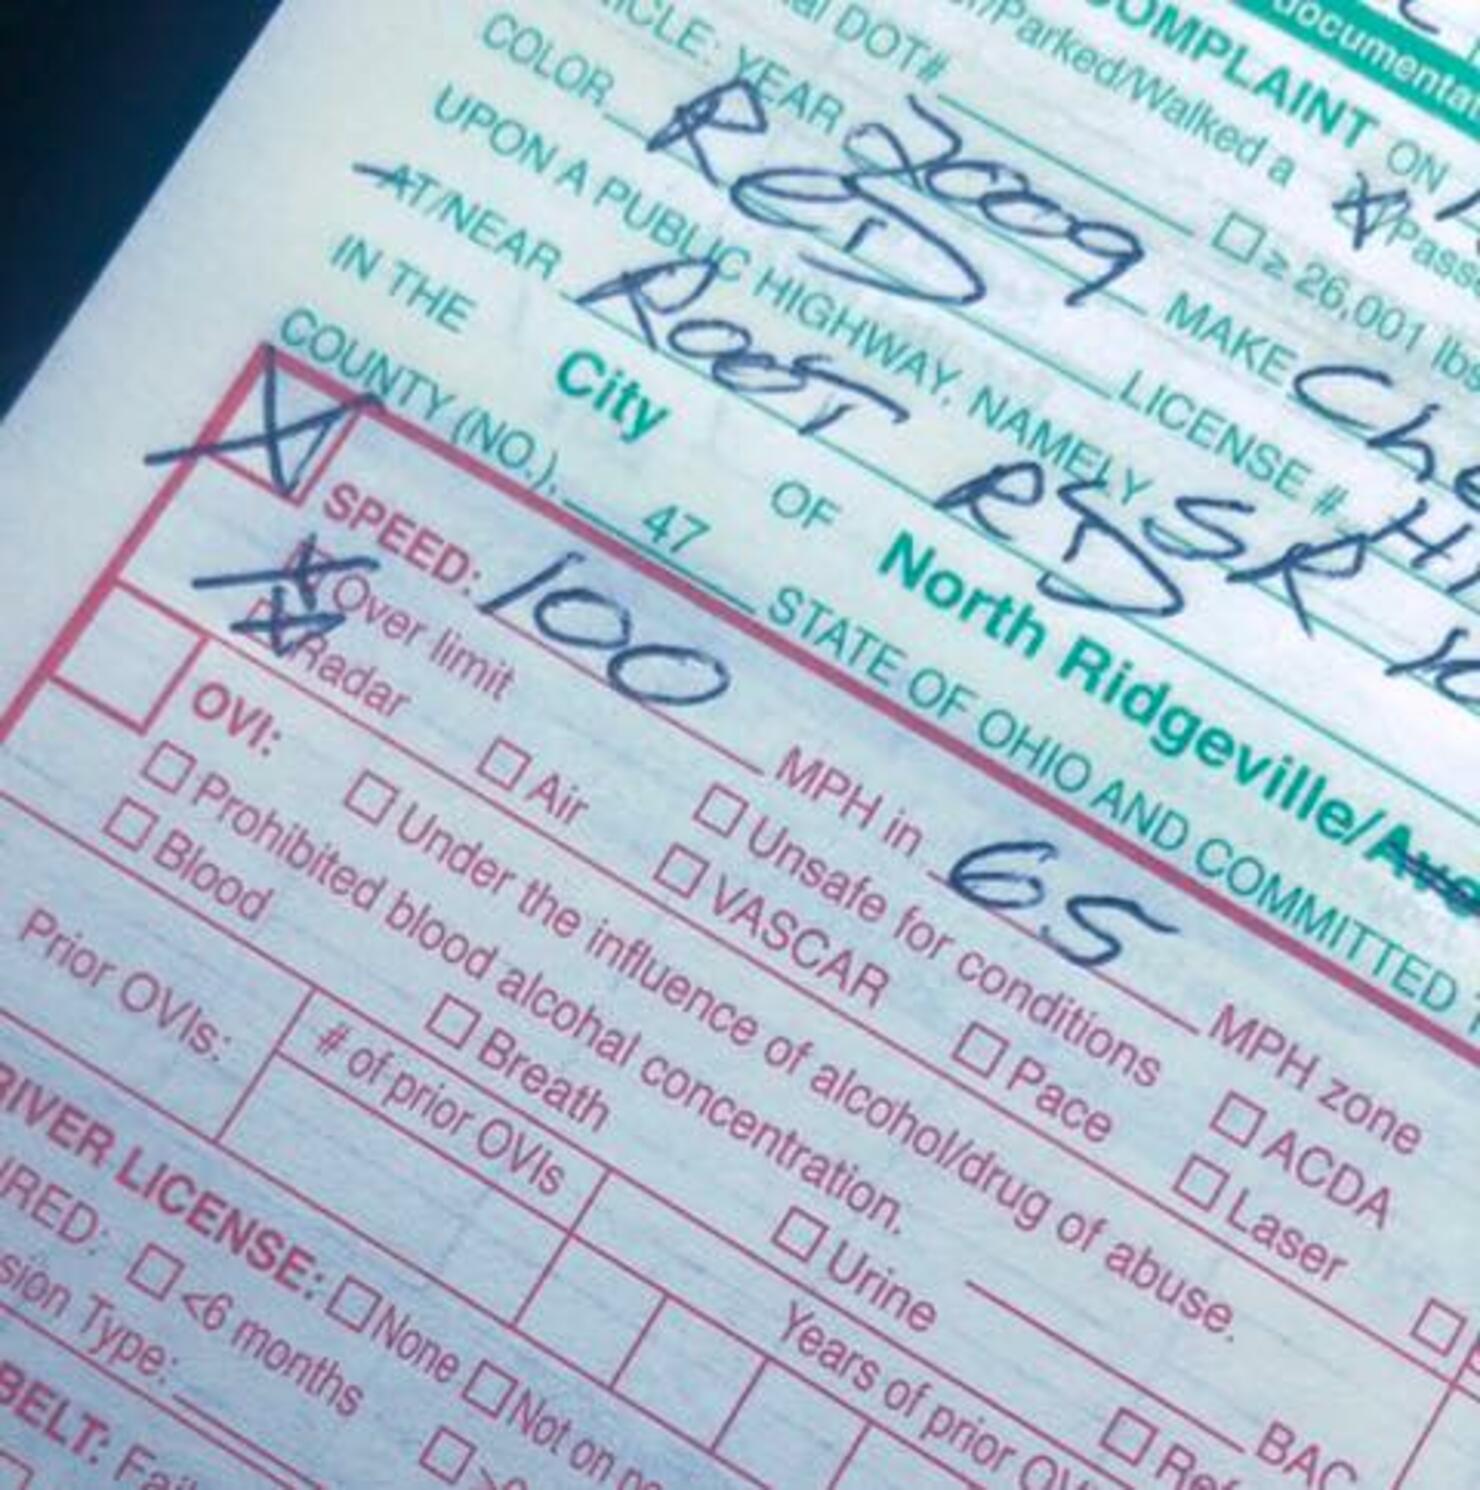 Officer's emotional note to speeding teenager goes viral